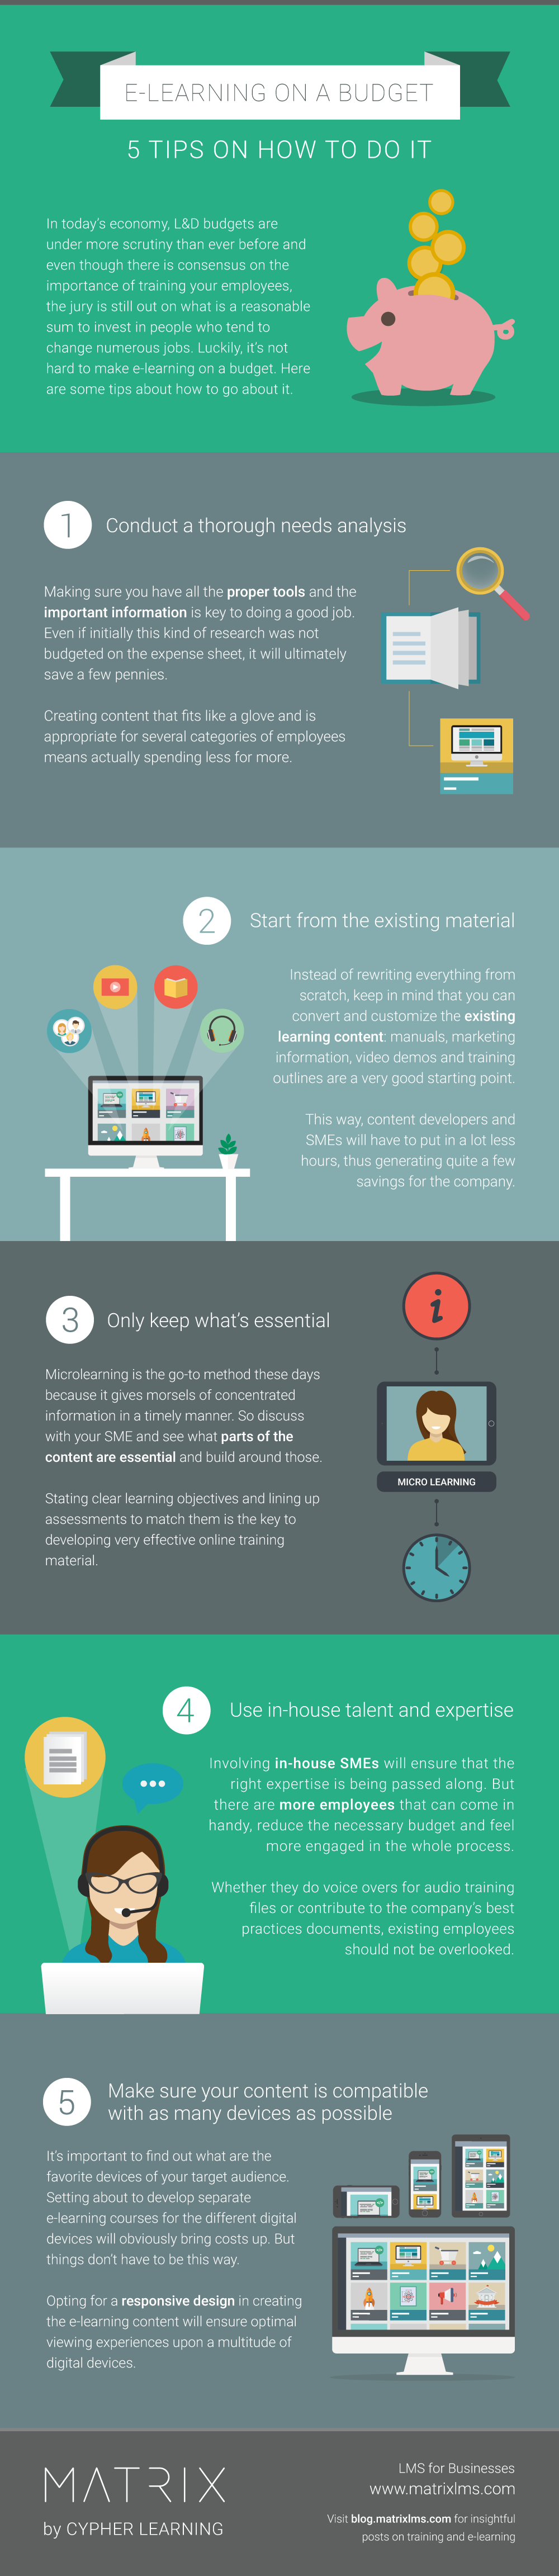 E-learning on a budget: 5 Tips on how to do it INFOGRAPHIC